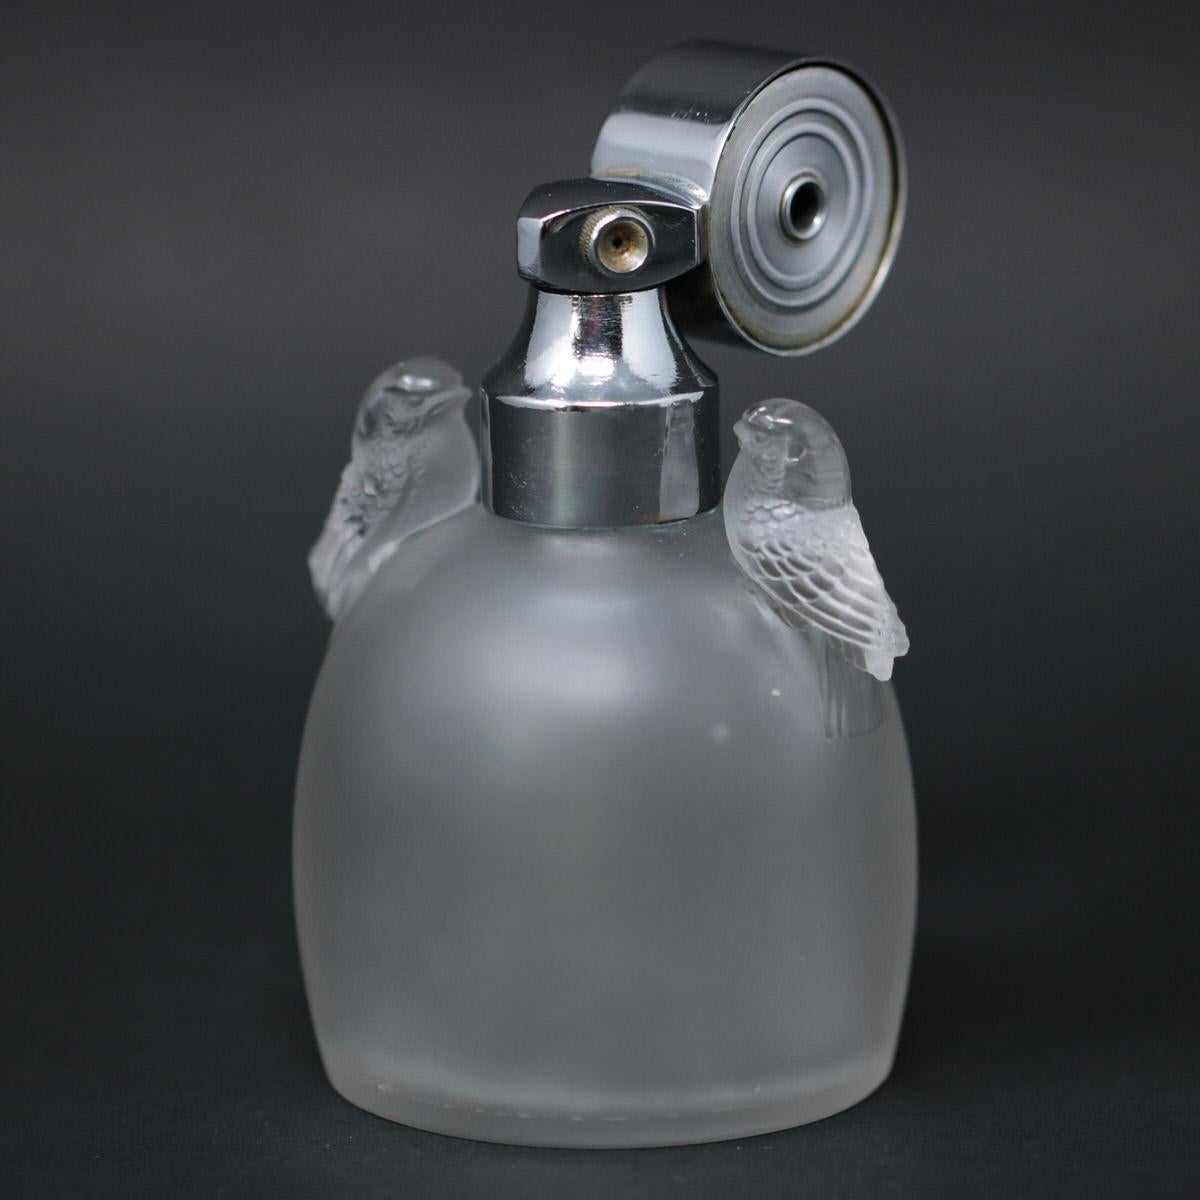 Rene Lalique frosted glass 'Marcel Frank Perruches' perfume bottle with atomiser. This pattern features two birds, sitting either side of the bottle neck. Wheel cut makers mark, 'R LALIQUE FRANCE', around base. Book reference: Marcilhac MARCEL FRANK